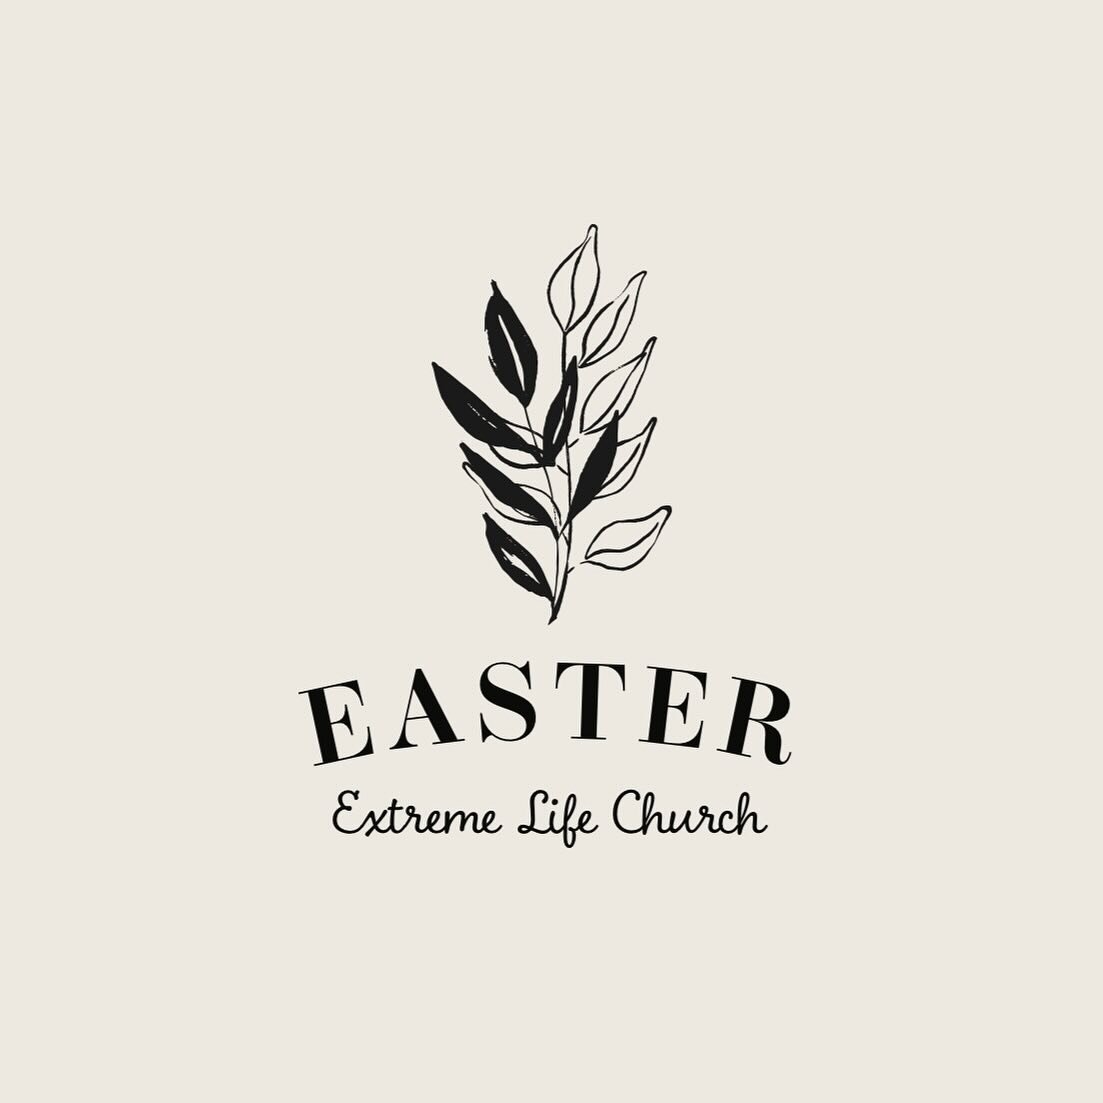 Join us on Sunday to celebrate Jesus resurrection and the freedom he has paid for us to live in! We will have hot cross buns before the service from 10.45am!